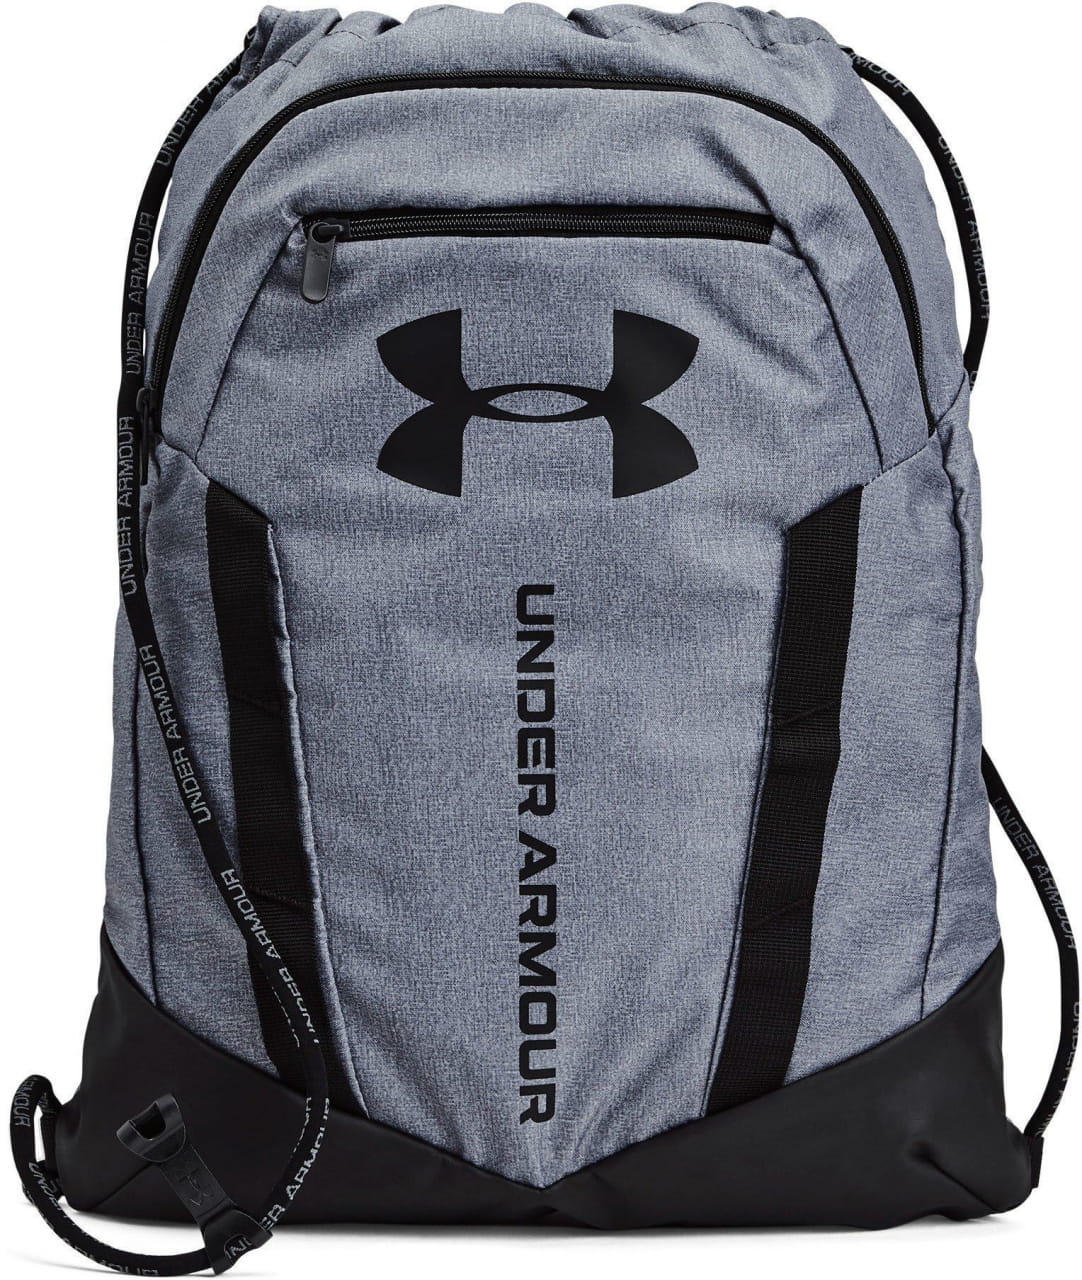 Unisex-Stadt-Rucksack Under Armour Undeniable Sackpack-GRY